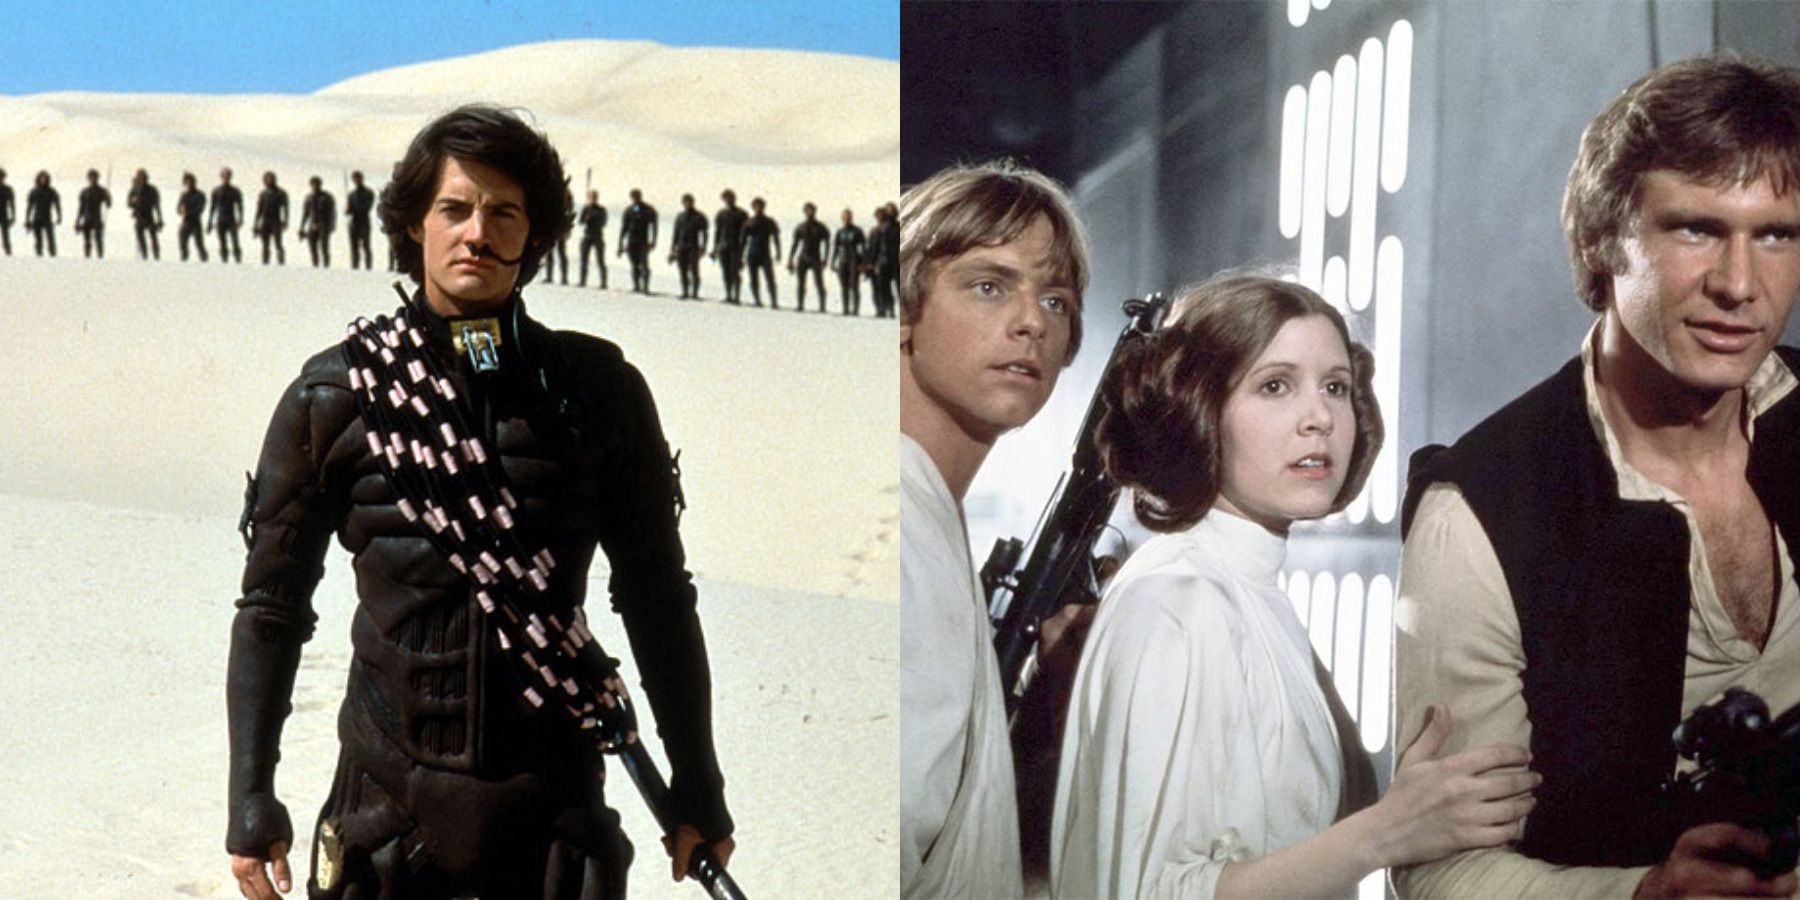 Sci-fi films feature split image Dune (1984) and Star Wars: Episode IV (1977)